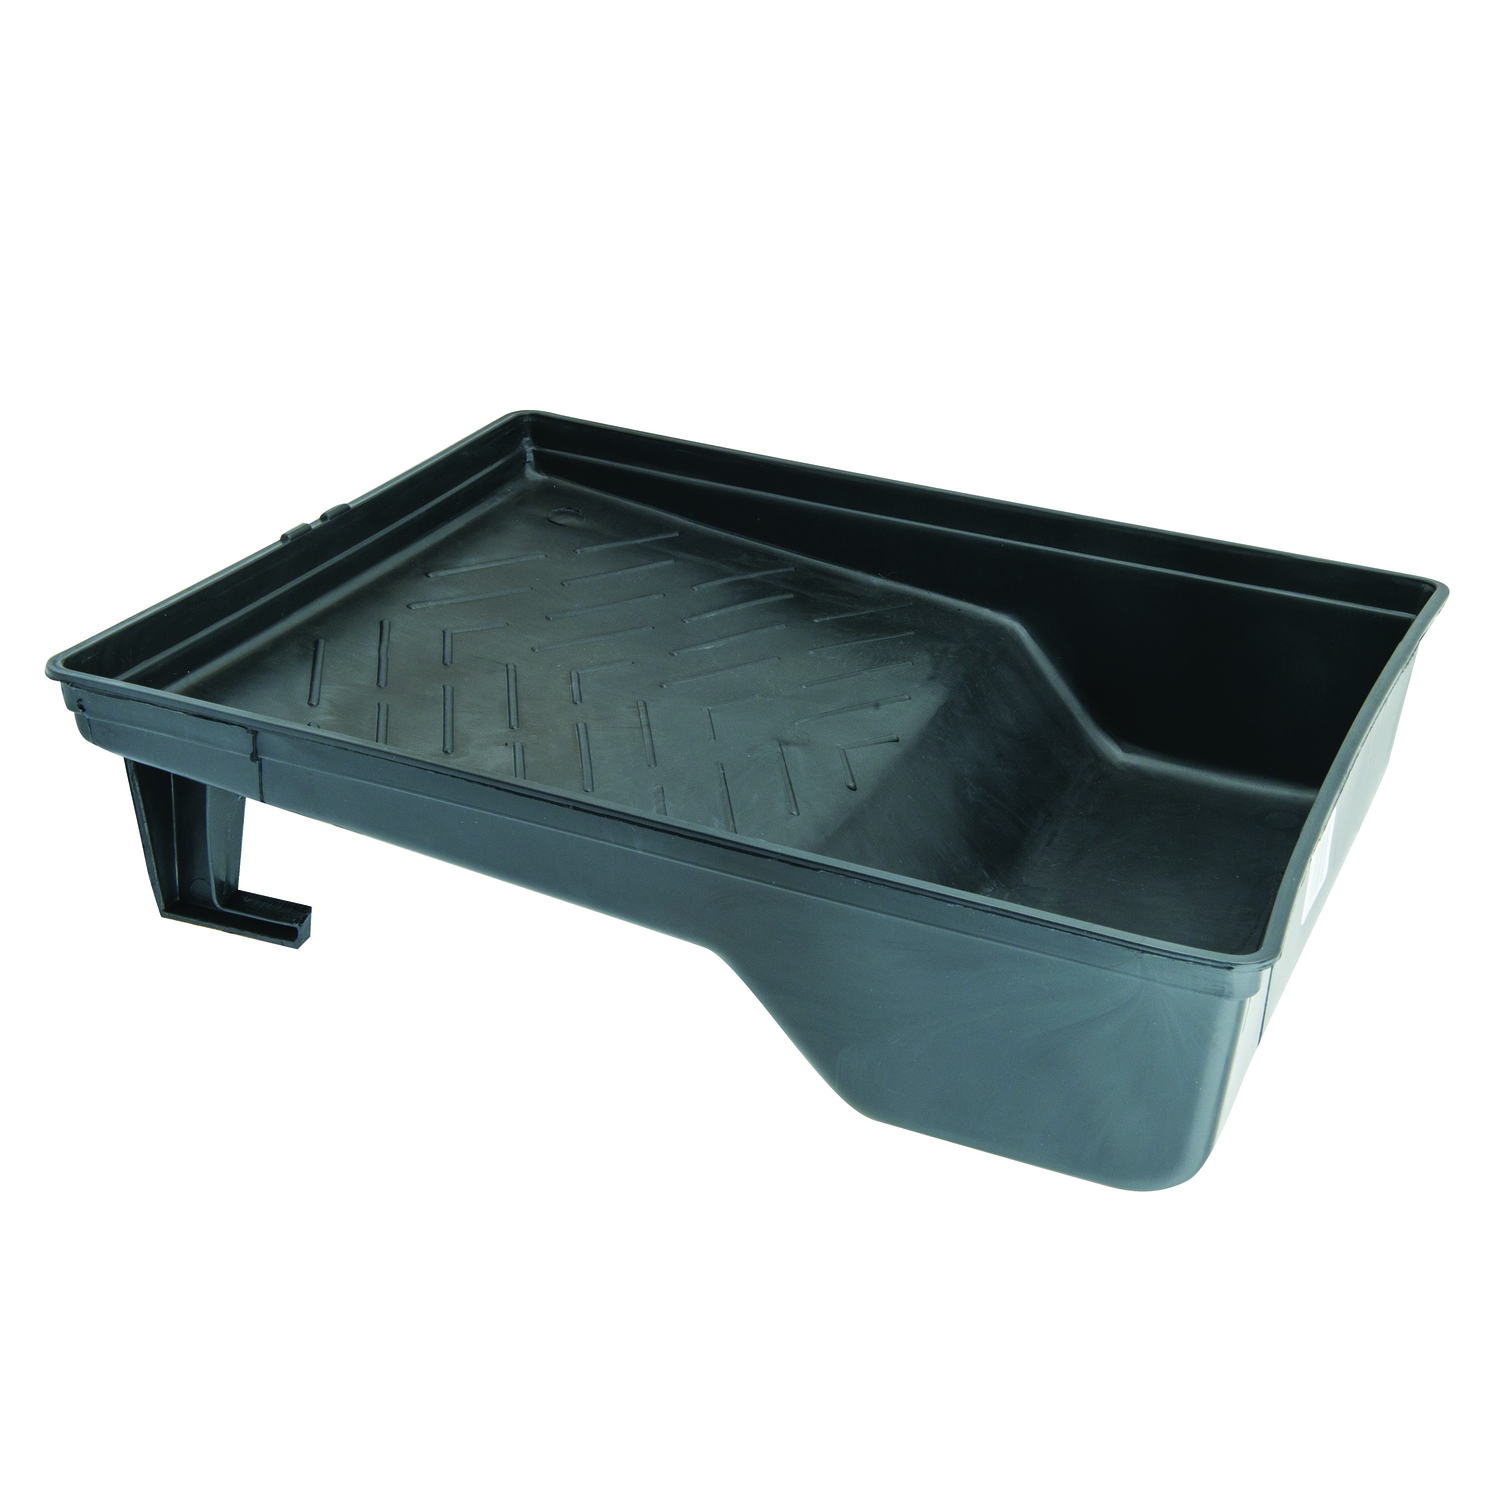 Photos - Paint Sprayer Wooster Deep-Well Polypropylene 11 in. W X 14.5 in. L 2 qt Paint Tray R404